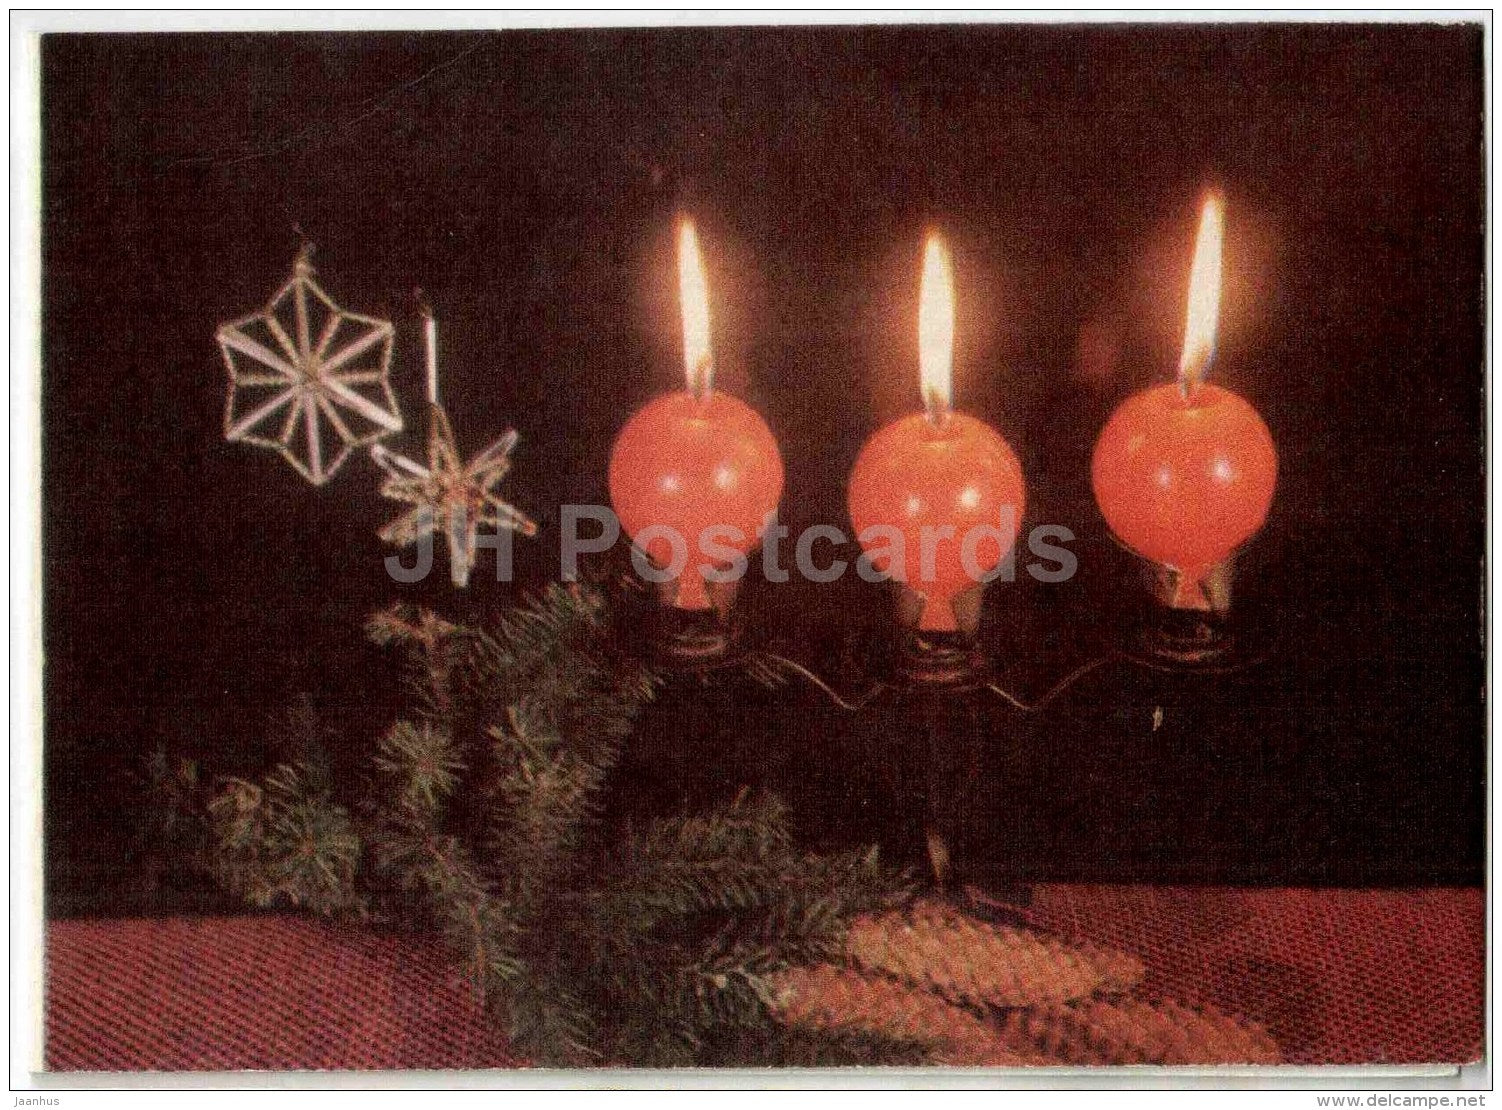 New Year Greeting Card - candles - decoration - 1971 - Estonia USSR - unused - JH Postcards